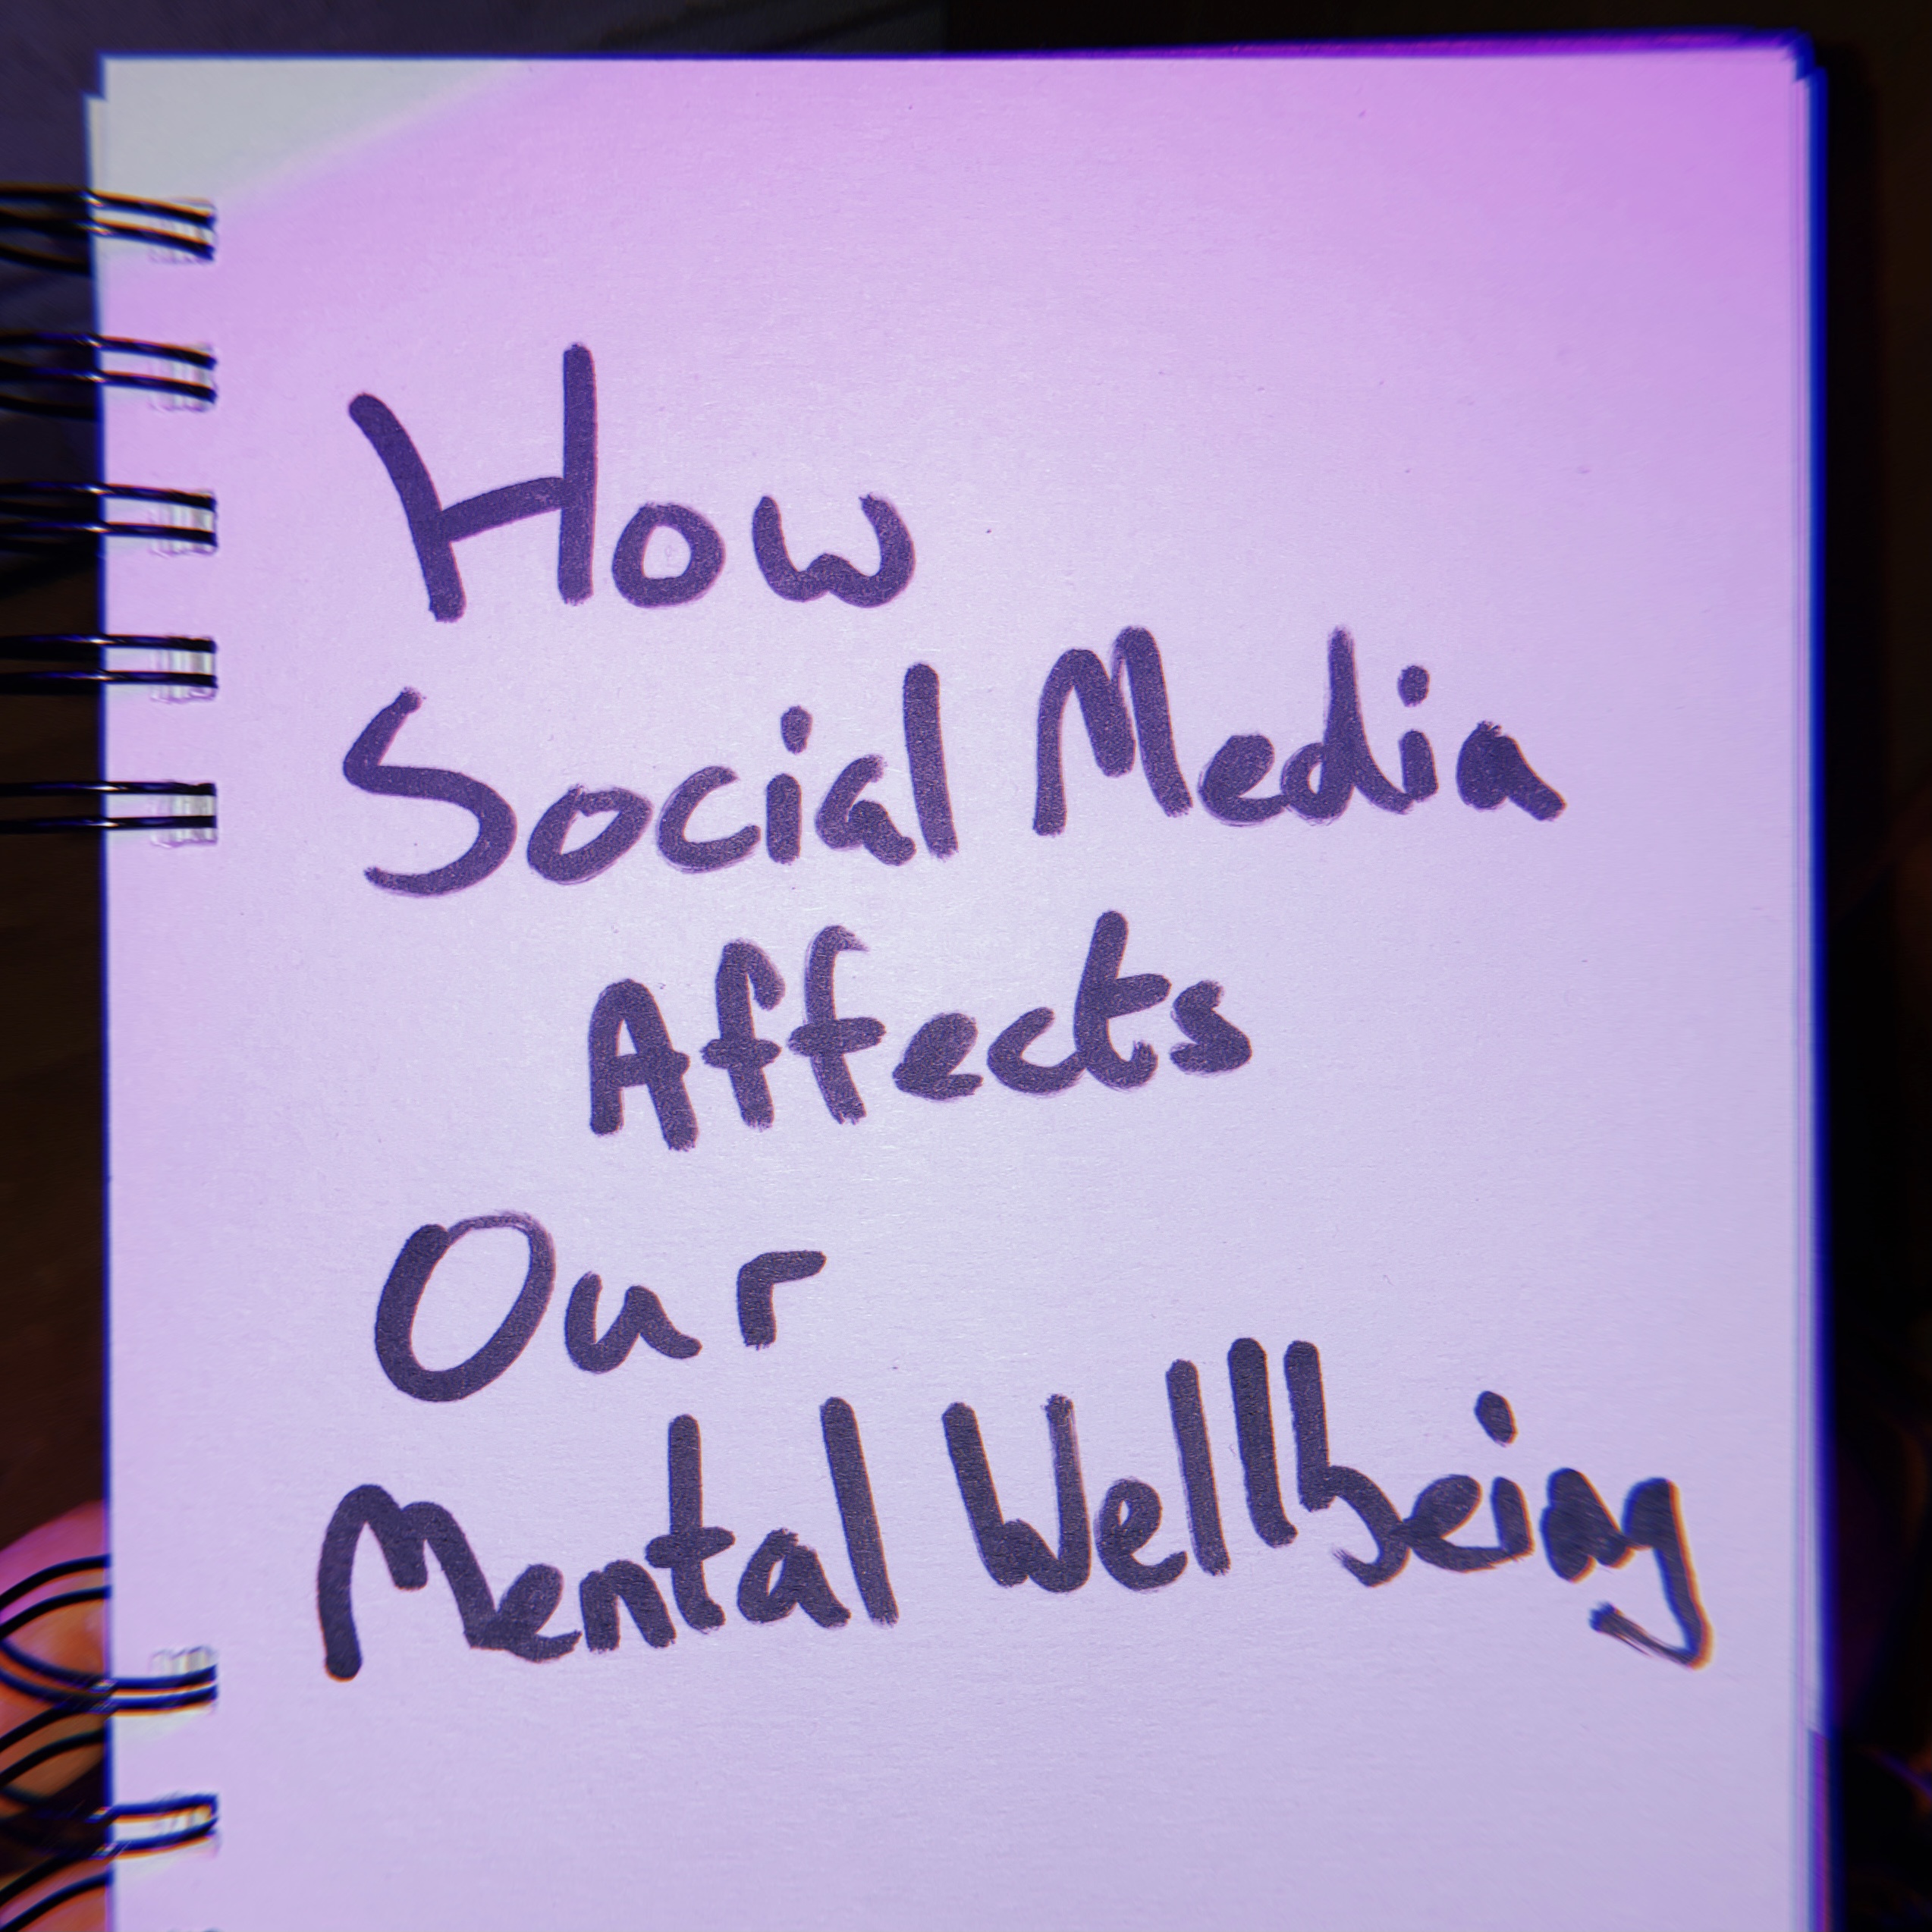 How Social Media Affects Our Mental Wellbeing